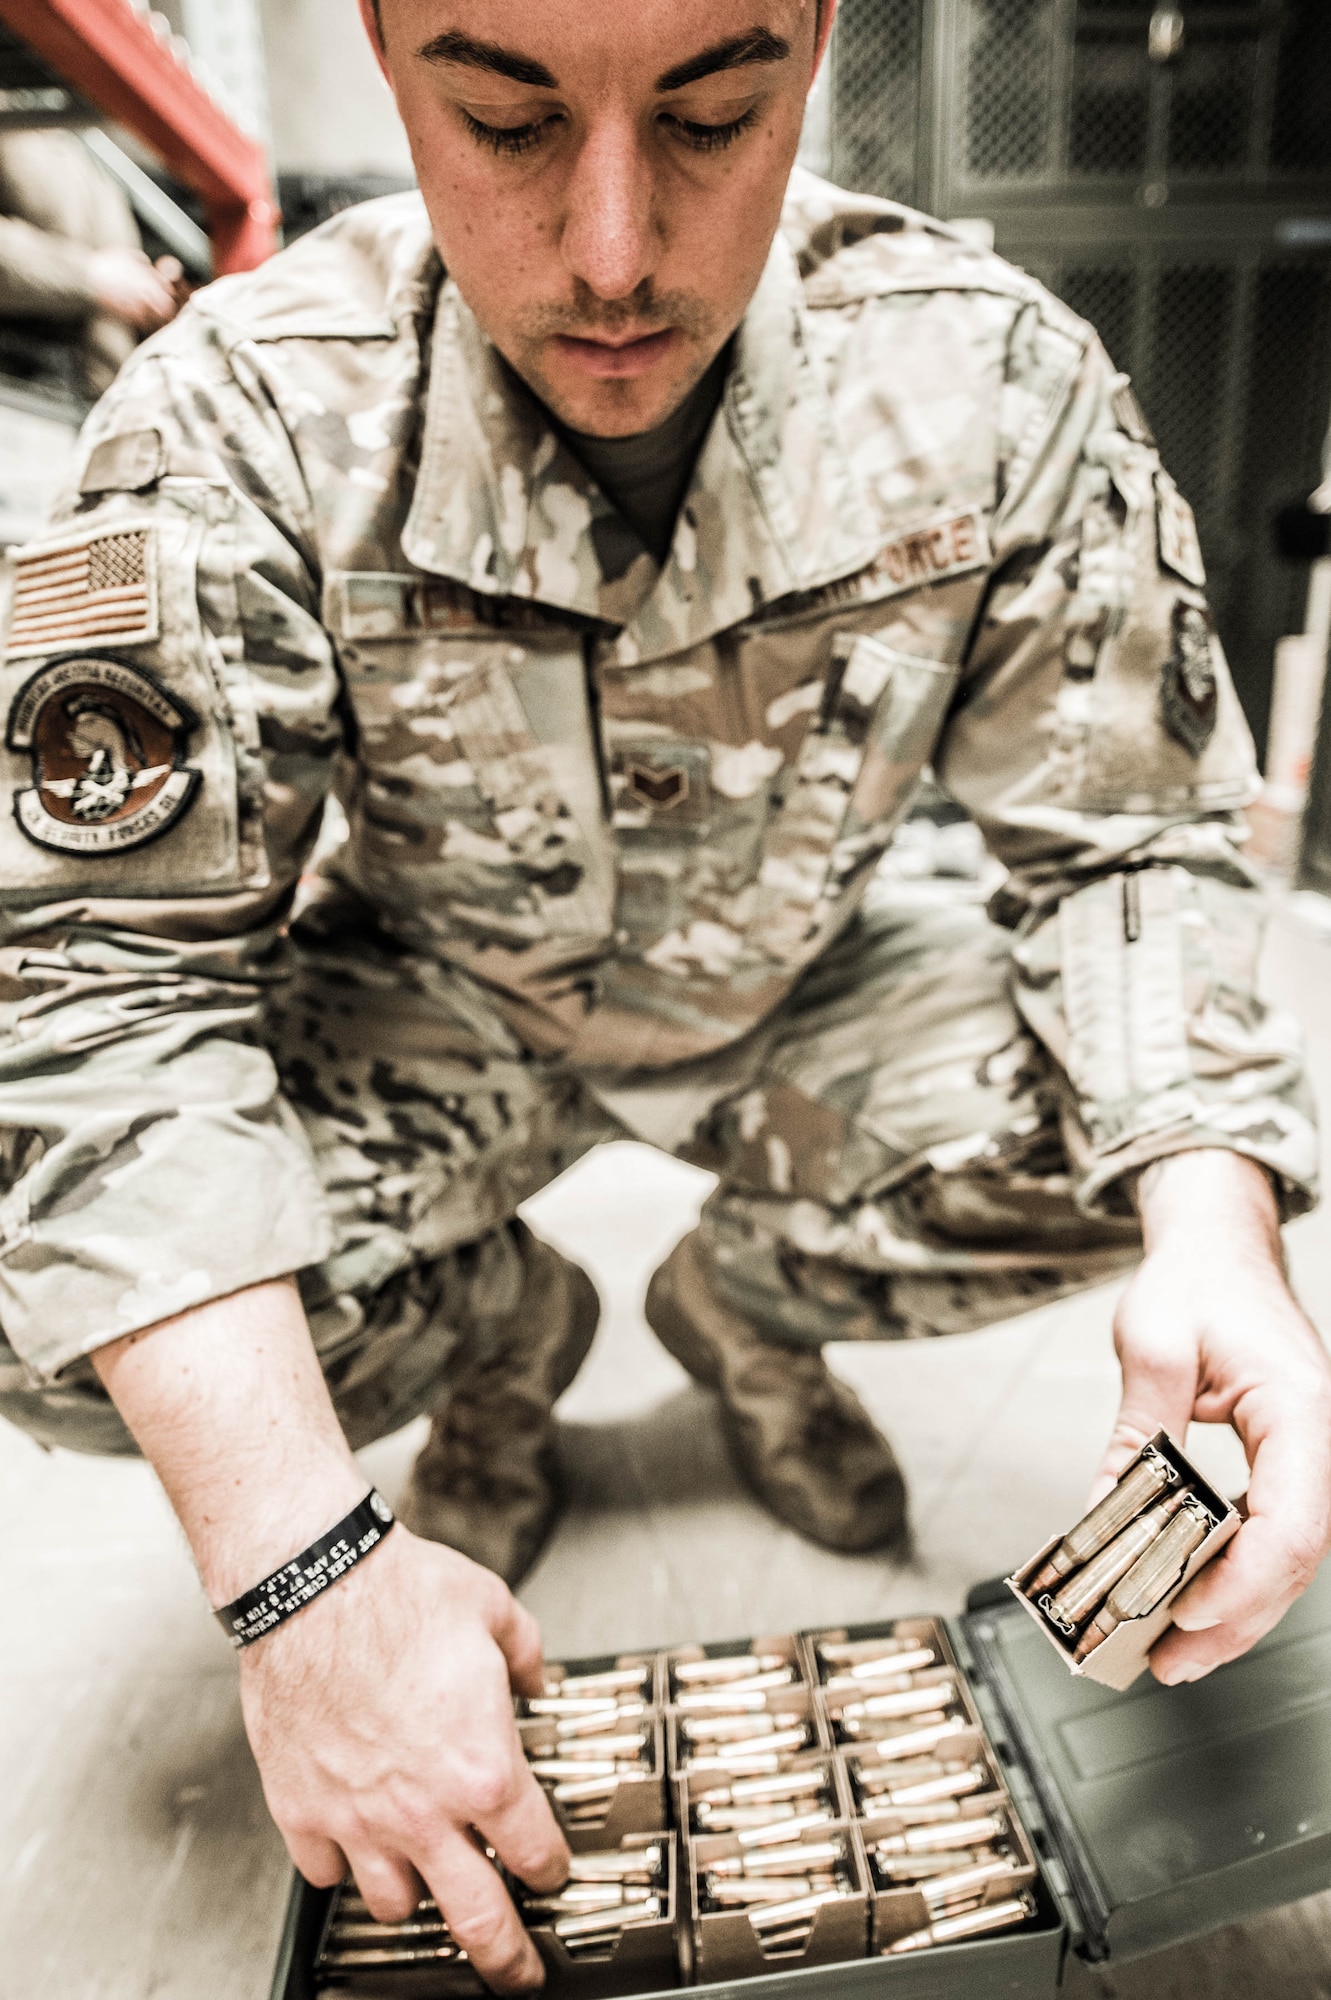 Staff Sgt. Christopher Keller, 436th Security Forces Squadron combat arms instructor, counts boxes of 5.56mm ammunition Dec. 17, 2021, at Dover Air Force Base, Delaware. Keller is one of five instructors at the Dover AFB Combat Arms Training and Maintenance facility. Each person receiving training is allotted an exact number of rounds to use during qualification. (U.S. Air Force photo by Mauricio Campino)